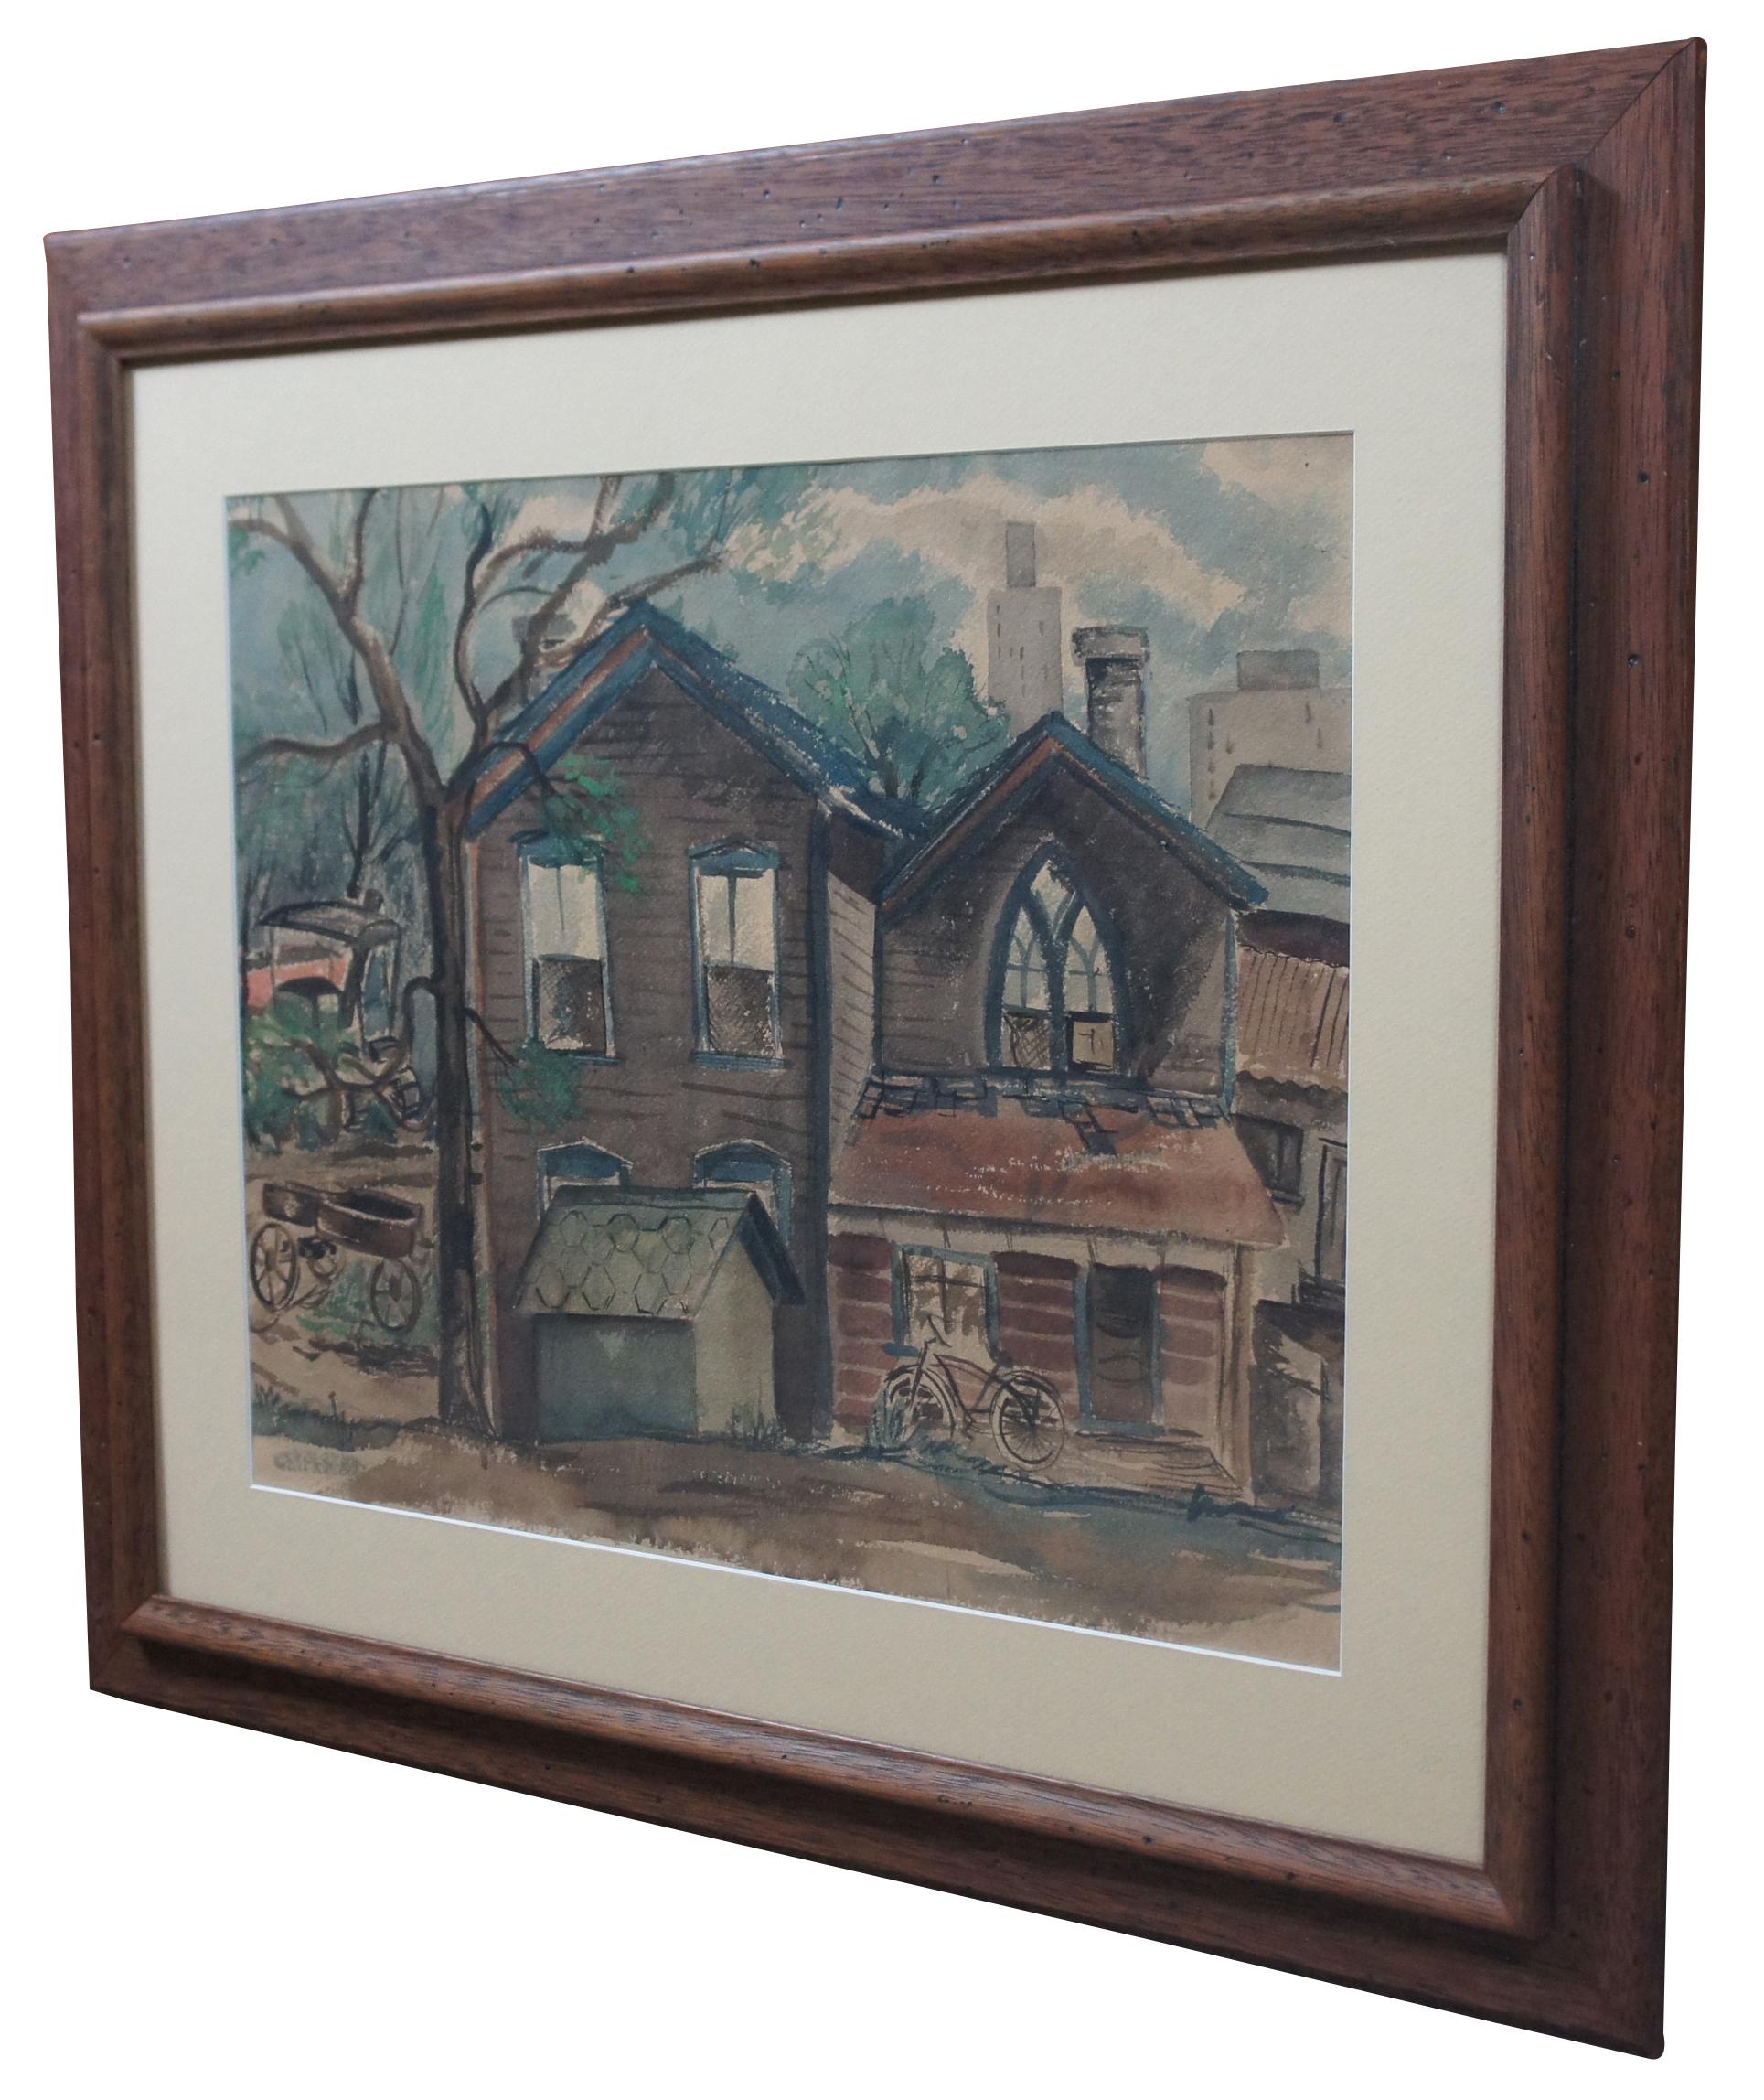 Framed original watercolor painting by James Yoko, showing a simple clapboard house with a bicycle on the porch and two wagons or carts in the side yard with taller city buildings in the background. “James Yoko (January 24, 1916 – April 11, 2004)